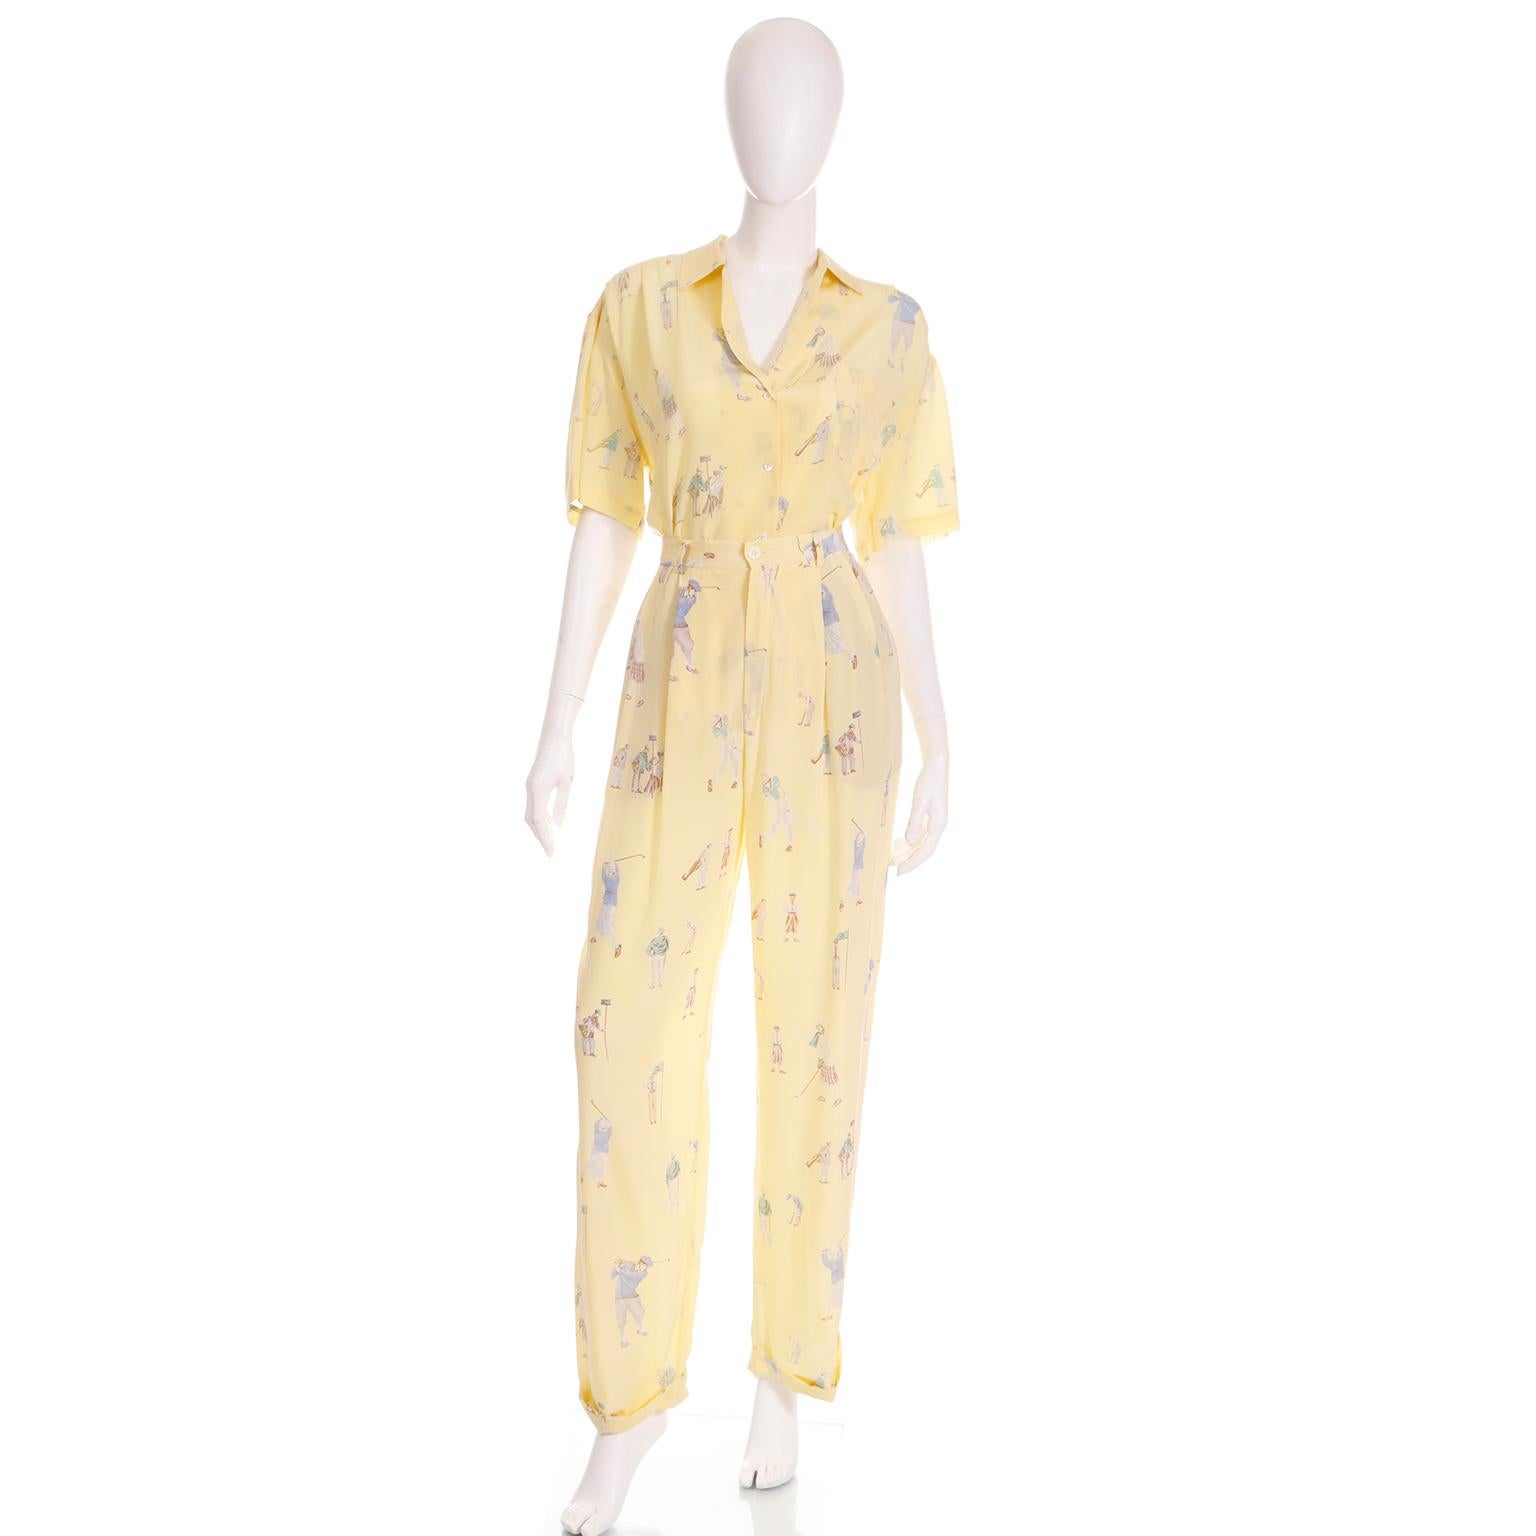 This is the best vintage Ralph Lauren pant suit we've seen and we are obsessed with the amazing print that features vintage golfers in vintage golf attire. This fabulous novelty print 2 piece outfit includes a short sleeve button front blouse and a